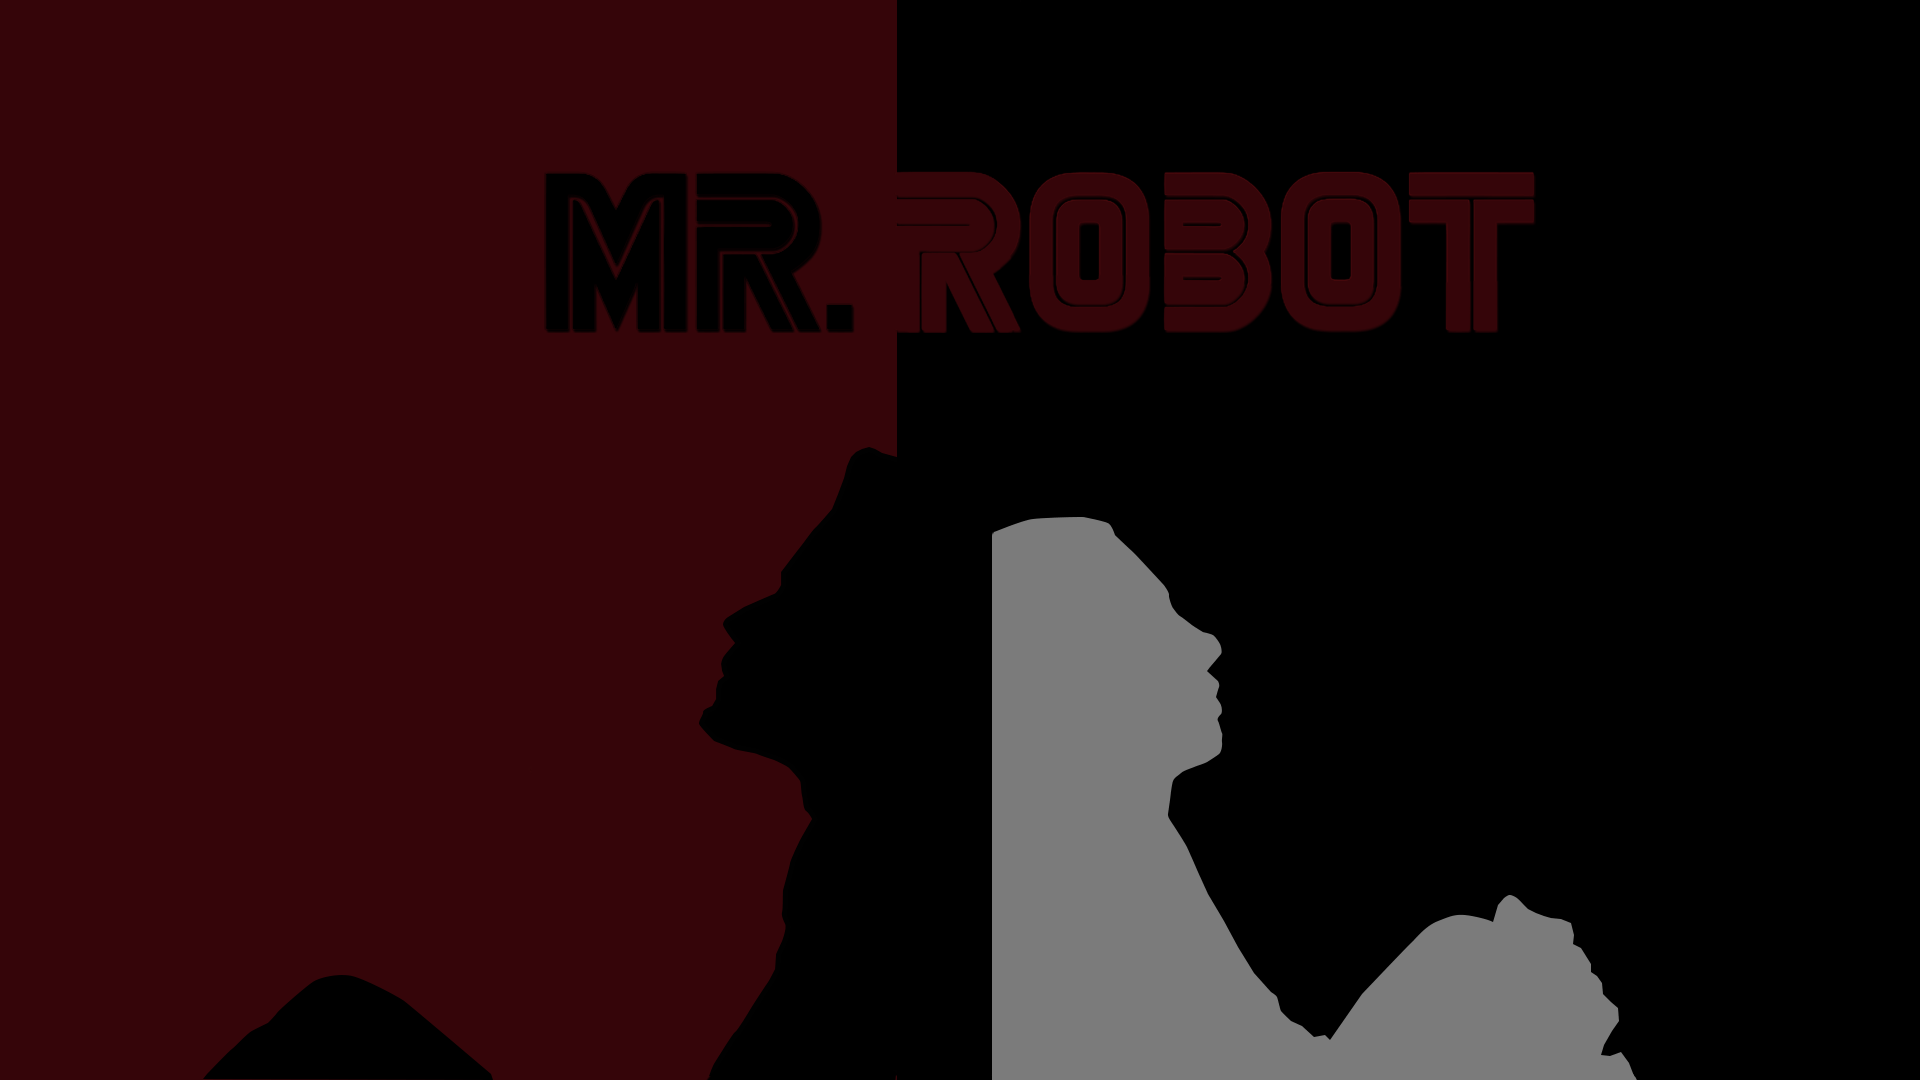 Here's my Mr. Robot wallpaper from the latest episode